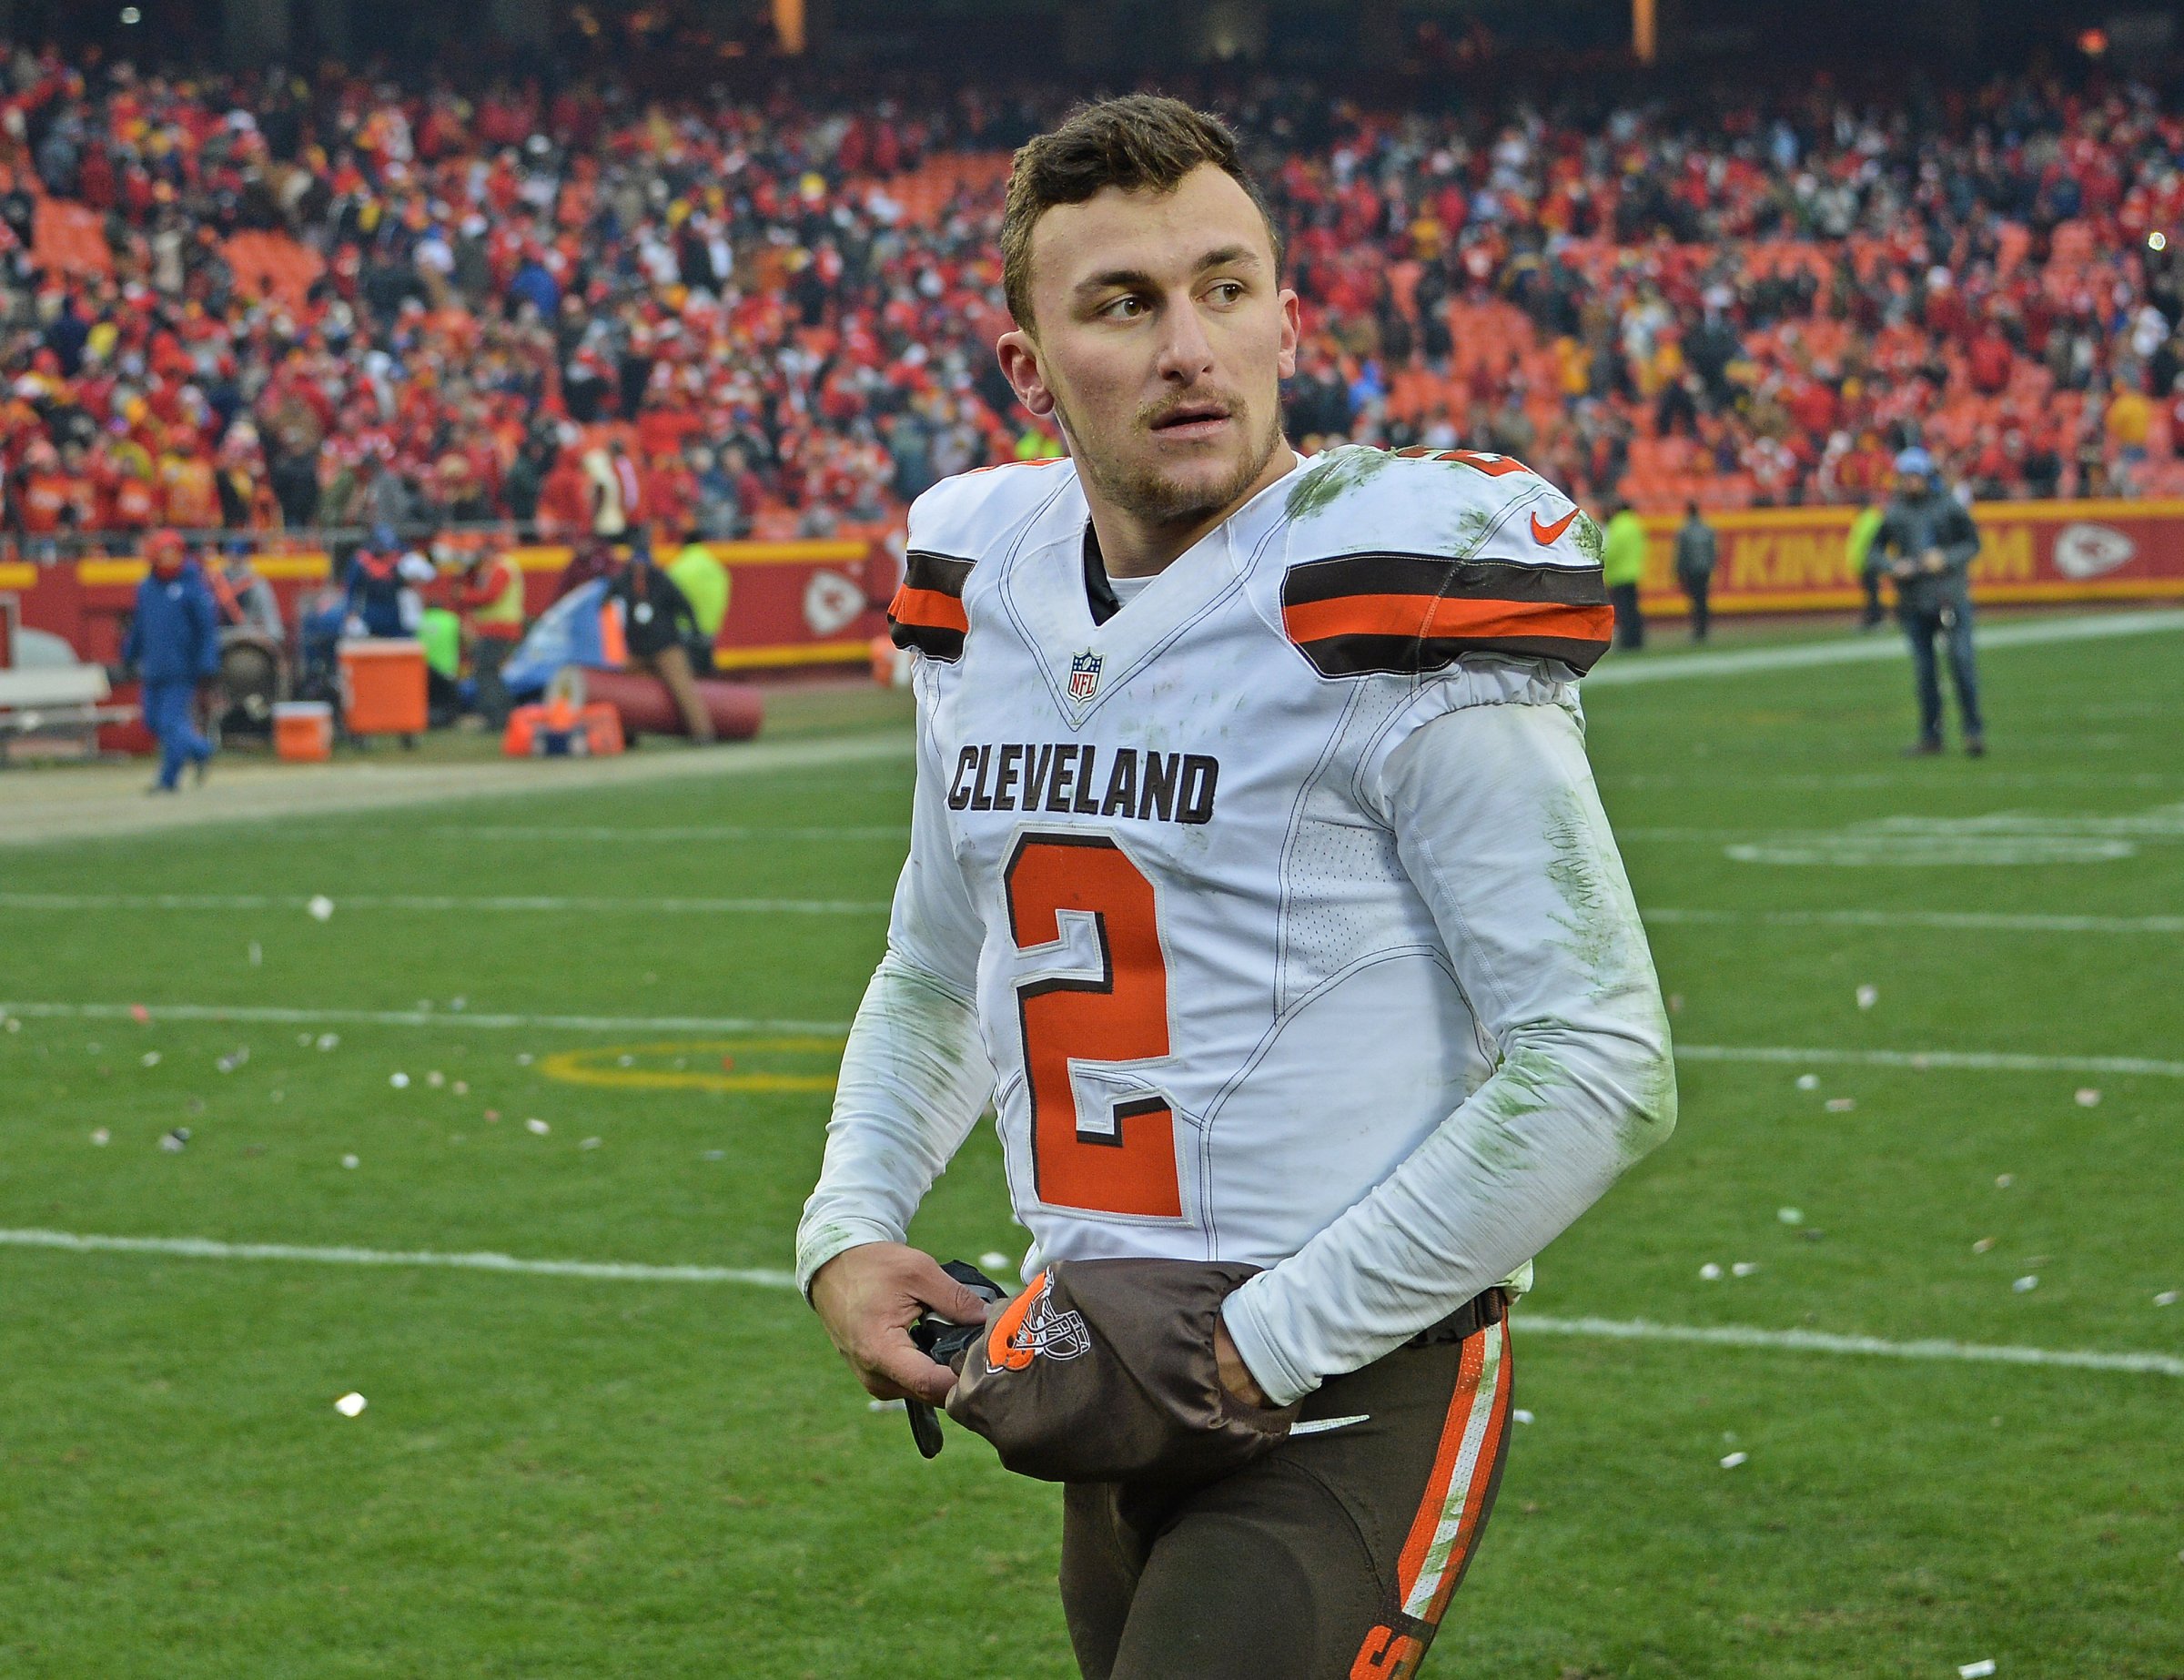 Quarterback Johnny Manziel #2 of the Cleveland Browns walks off the field, after losing to the Kansas City Chiefs on December 27, 2015 at Arrowhead Stadium in Kansas City, Missouri.